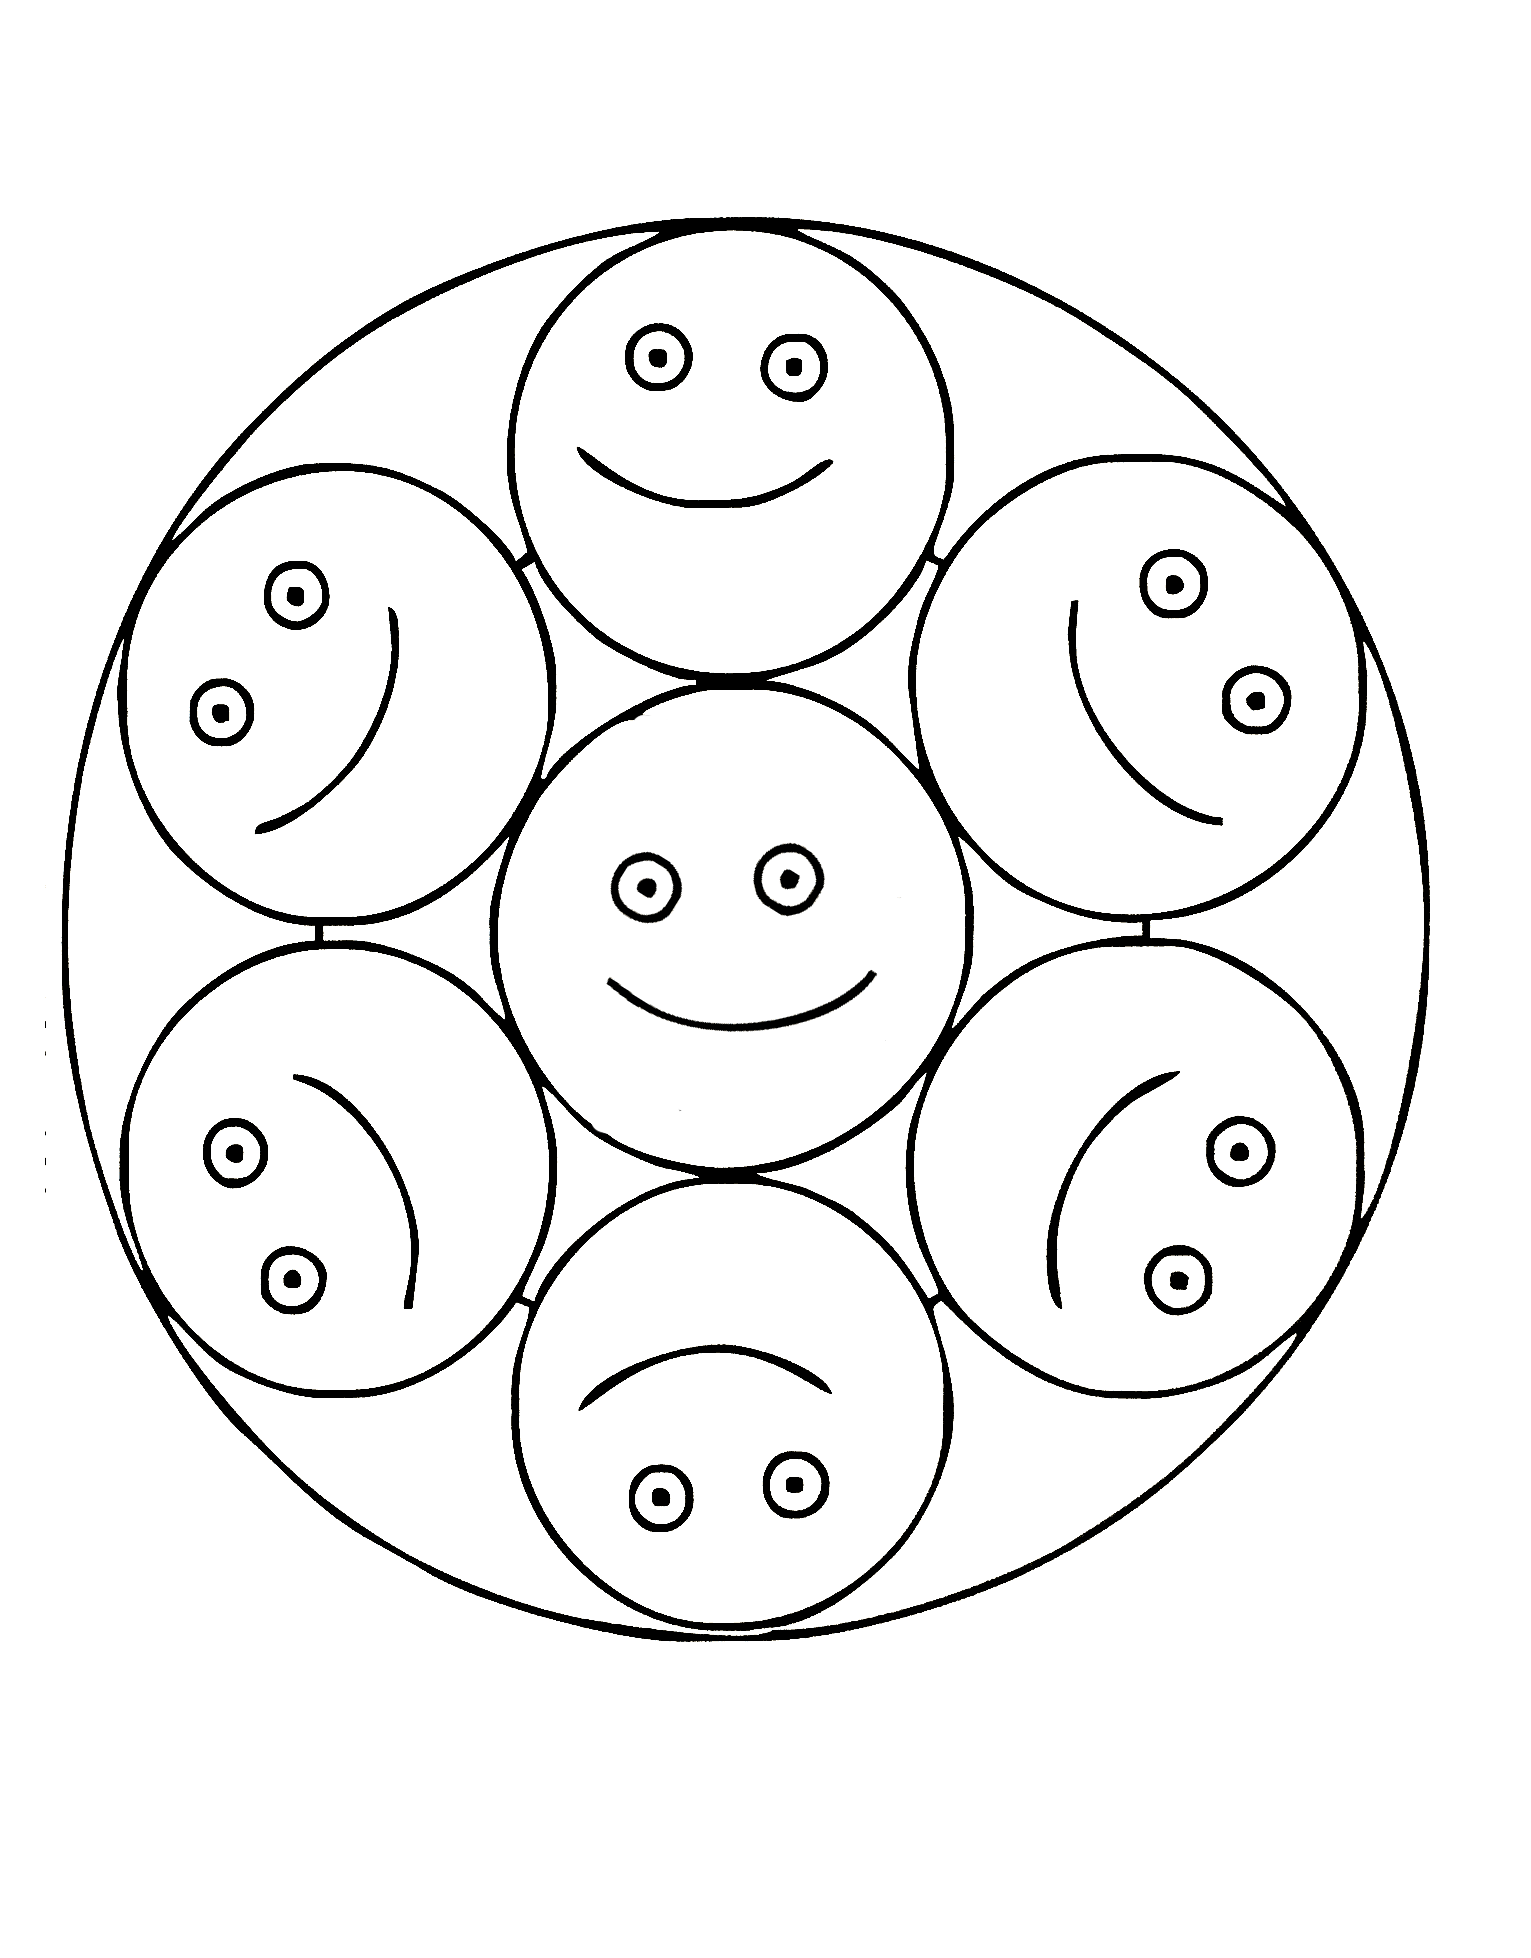 Simple mandala 42 - M&alas Coloring pages for kids to ...